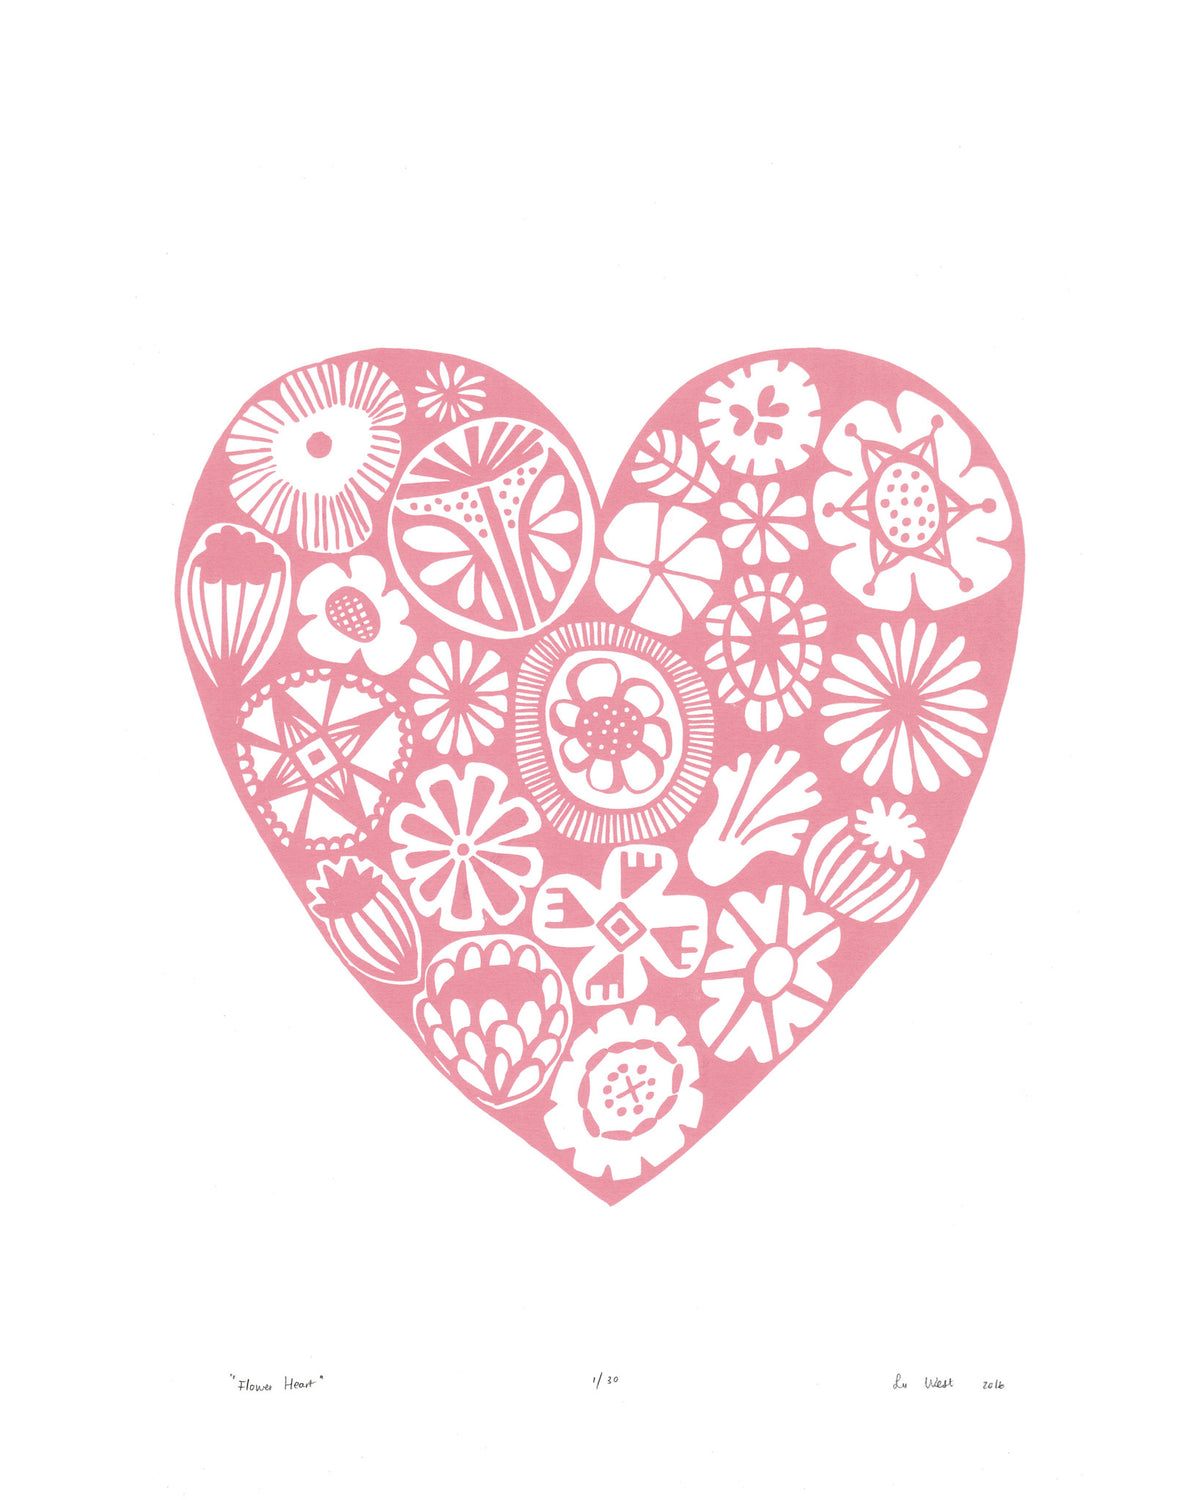 Botanical heart shaped print in pretty pastel rose quartz pink in a simple Scandinavian style. Inspired by the indigenous Fynbos flowers of South Africa.